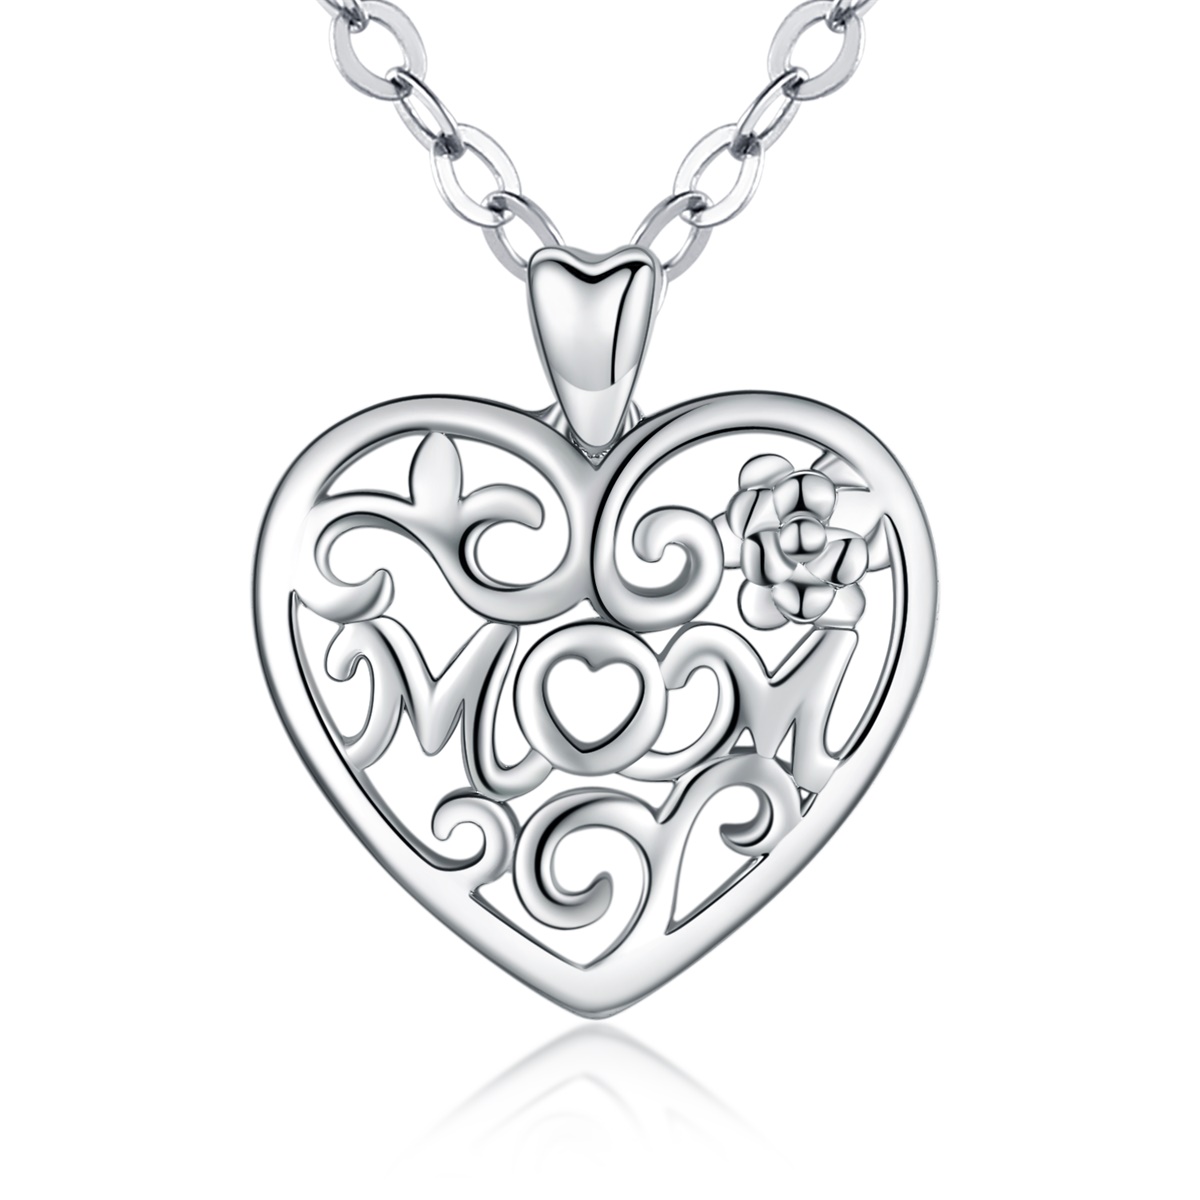 Merryshine Jewelry Elegant Mother's Day Gift Rhodium Plated Heart Necklace for Mom